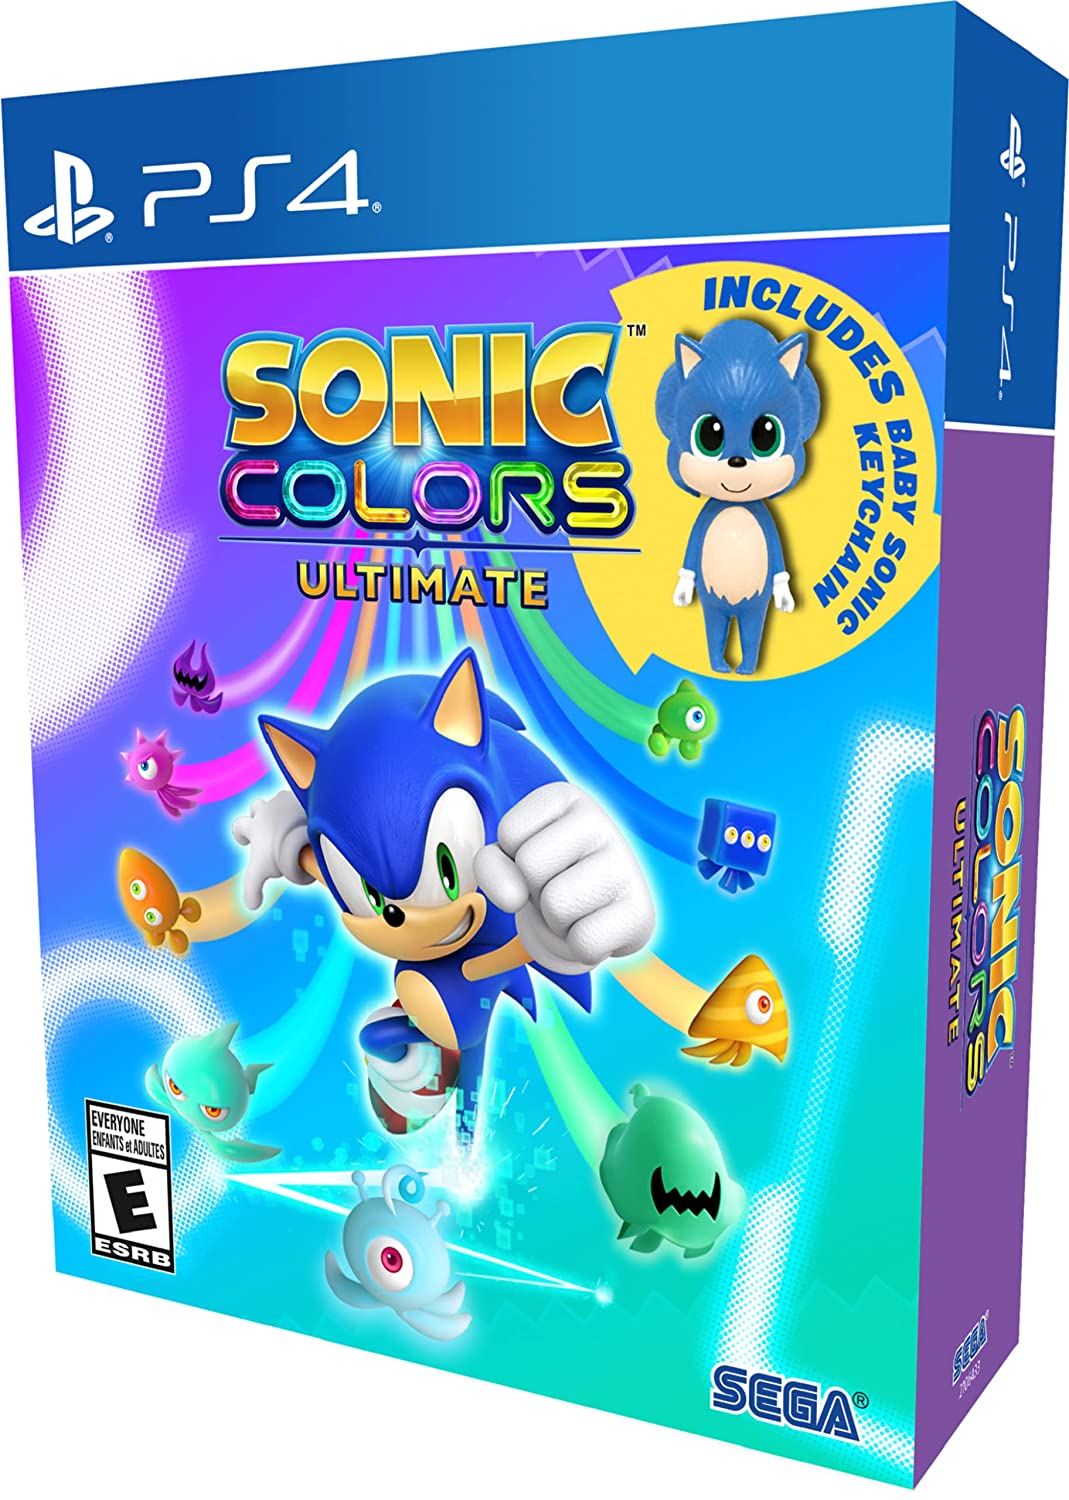 Sonic Colors Ultimate (W/ Keychain) - Darkside Records